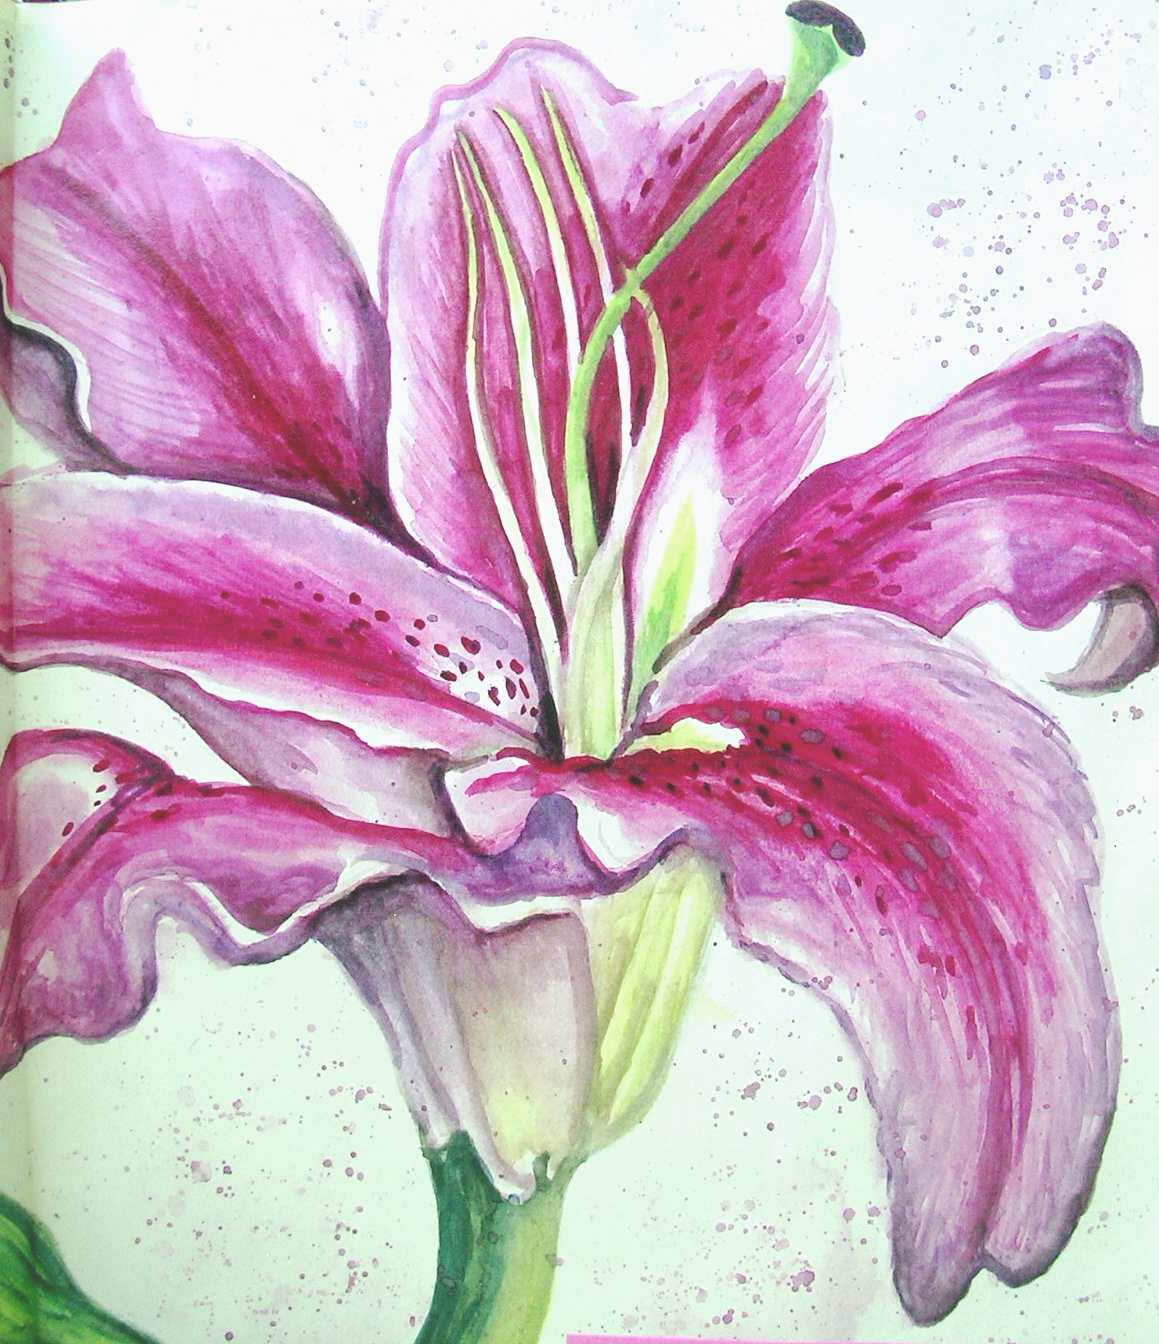 Tiger Lily, watercolor 11x14